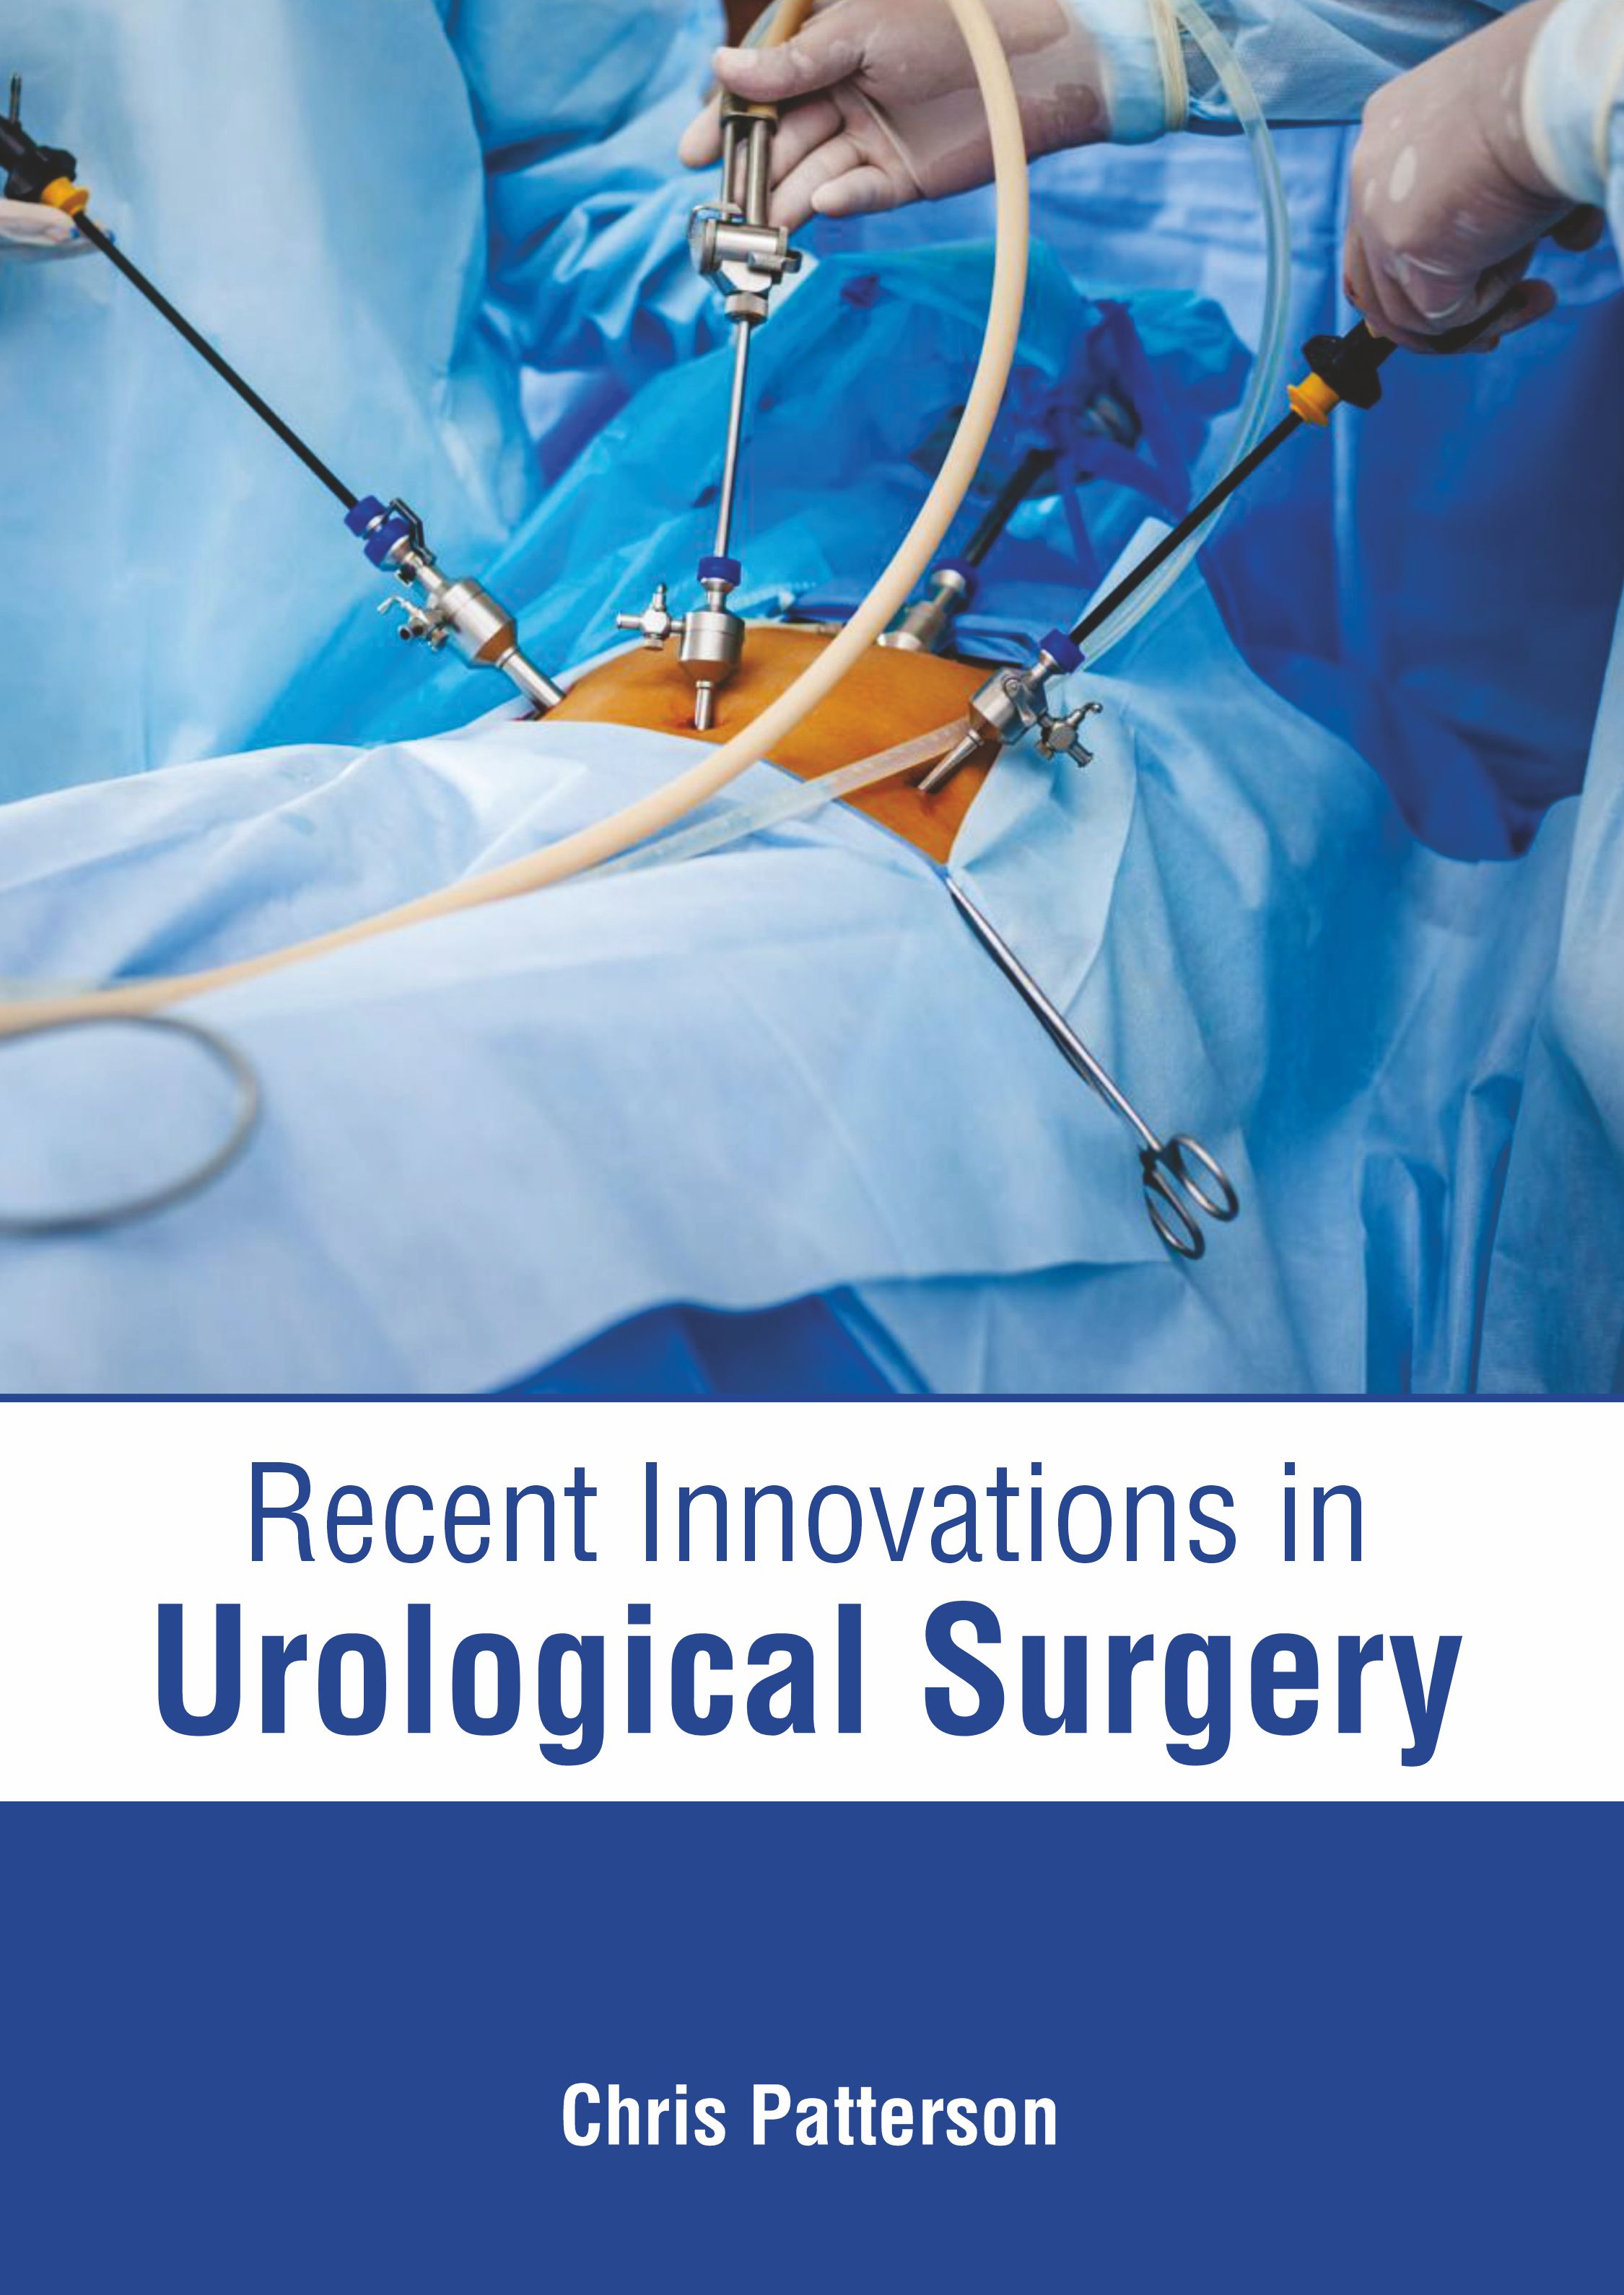 
medical-reference-books/surgery/recent-innovations-in-urological-surgery-9781639274970